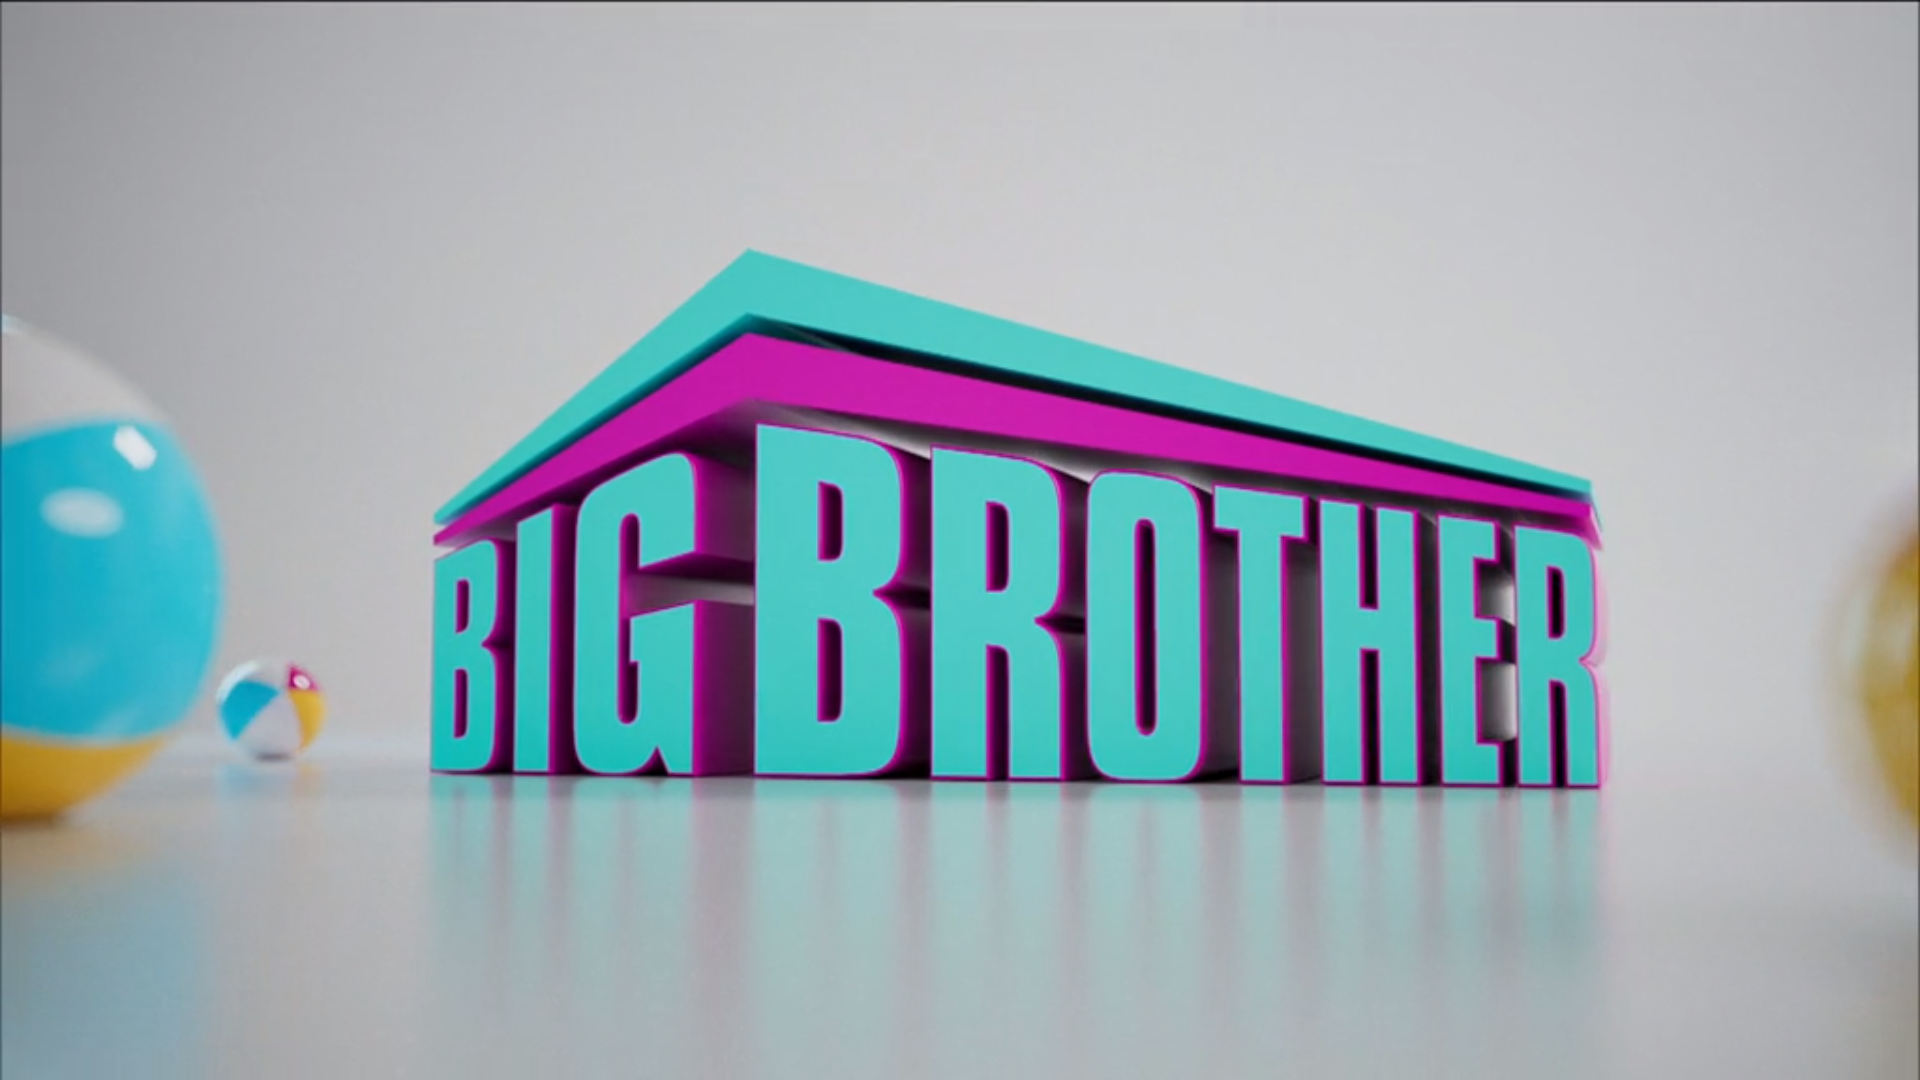 Big Brother reboot unveils new logo in teaser clip